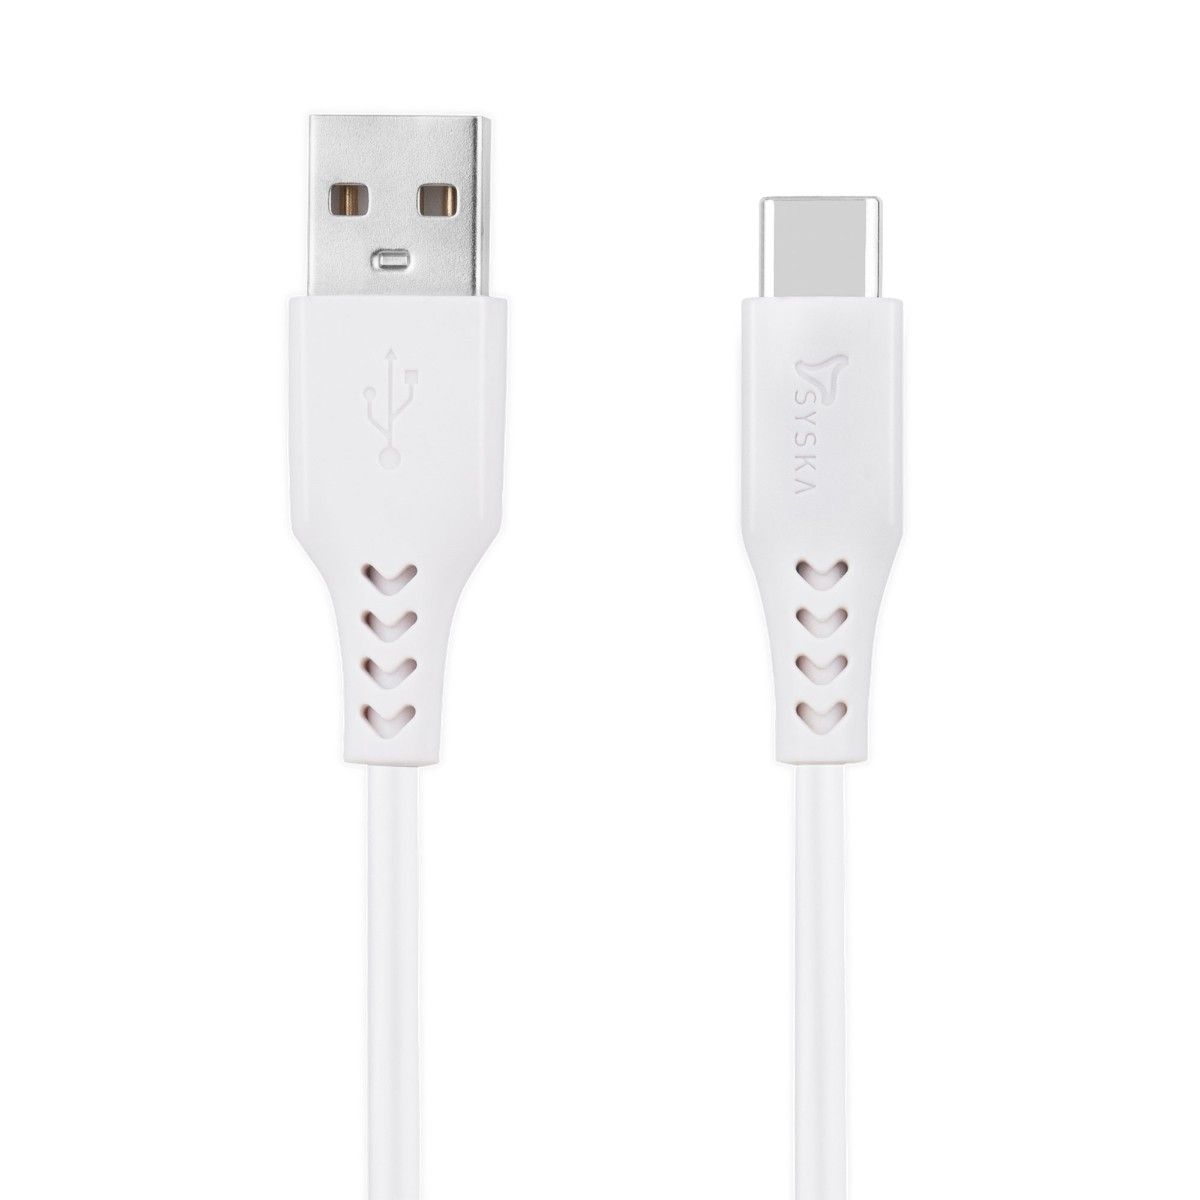 SYSKA CCCP02 1.2 M USB Type C Fast Charging Cable (Compatible with Mobile, Tablet, Pristine White)